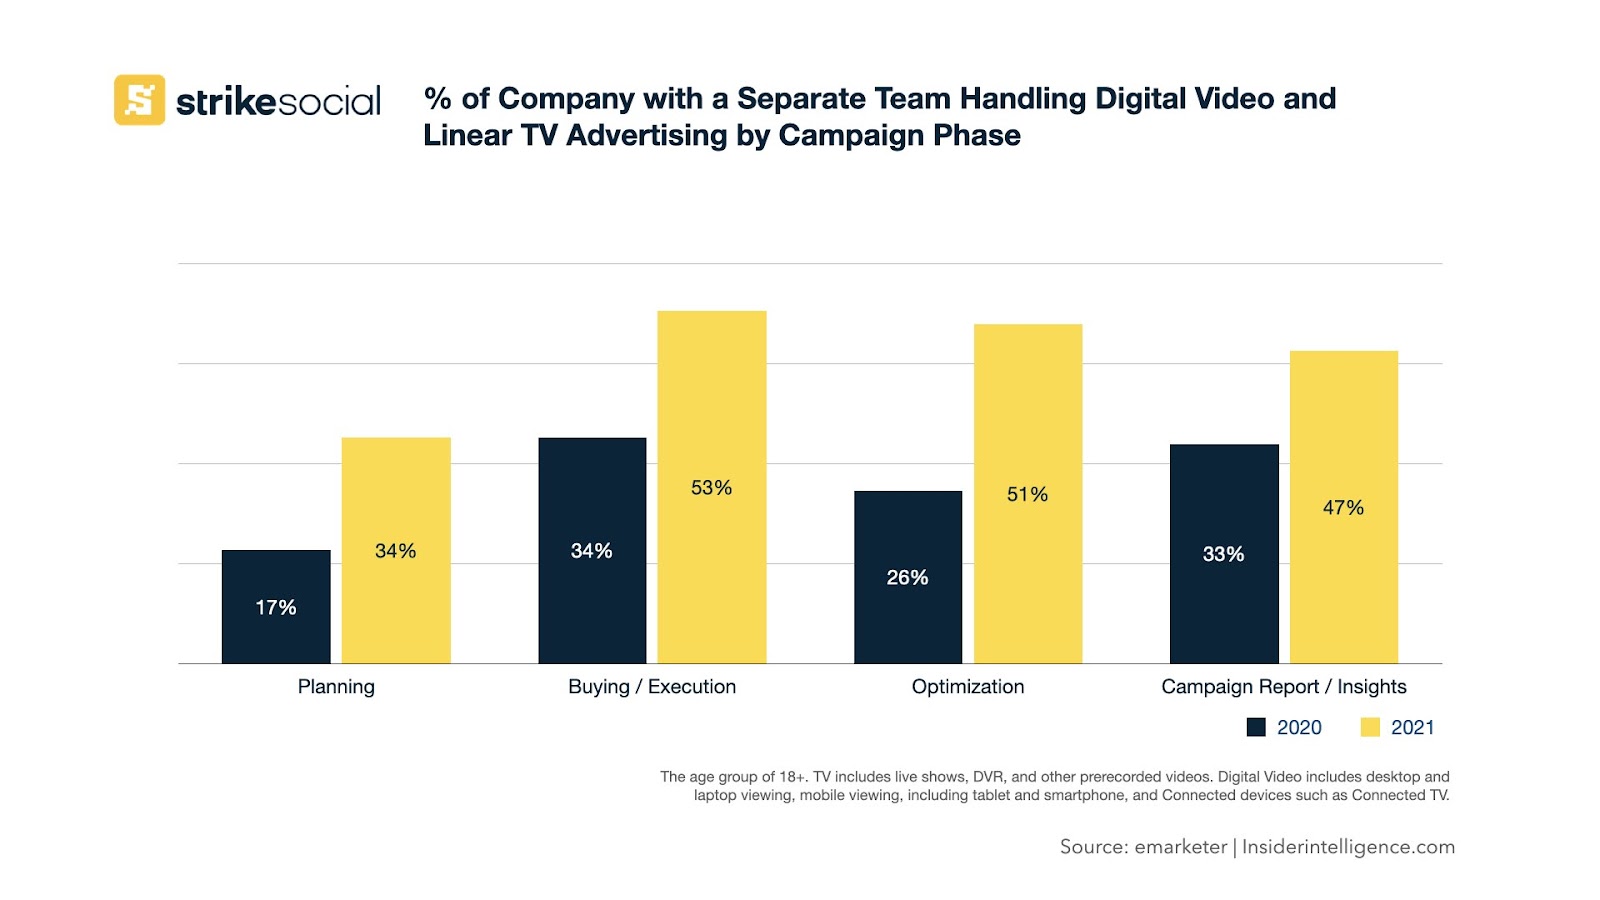 Percentage of Company with a Separate Team Handling Digital Video and Linear TV Advertising by Campaign Phase 